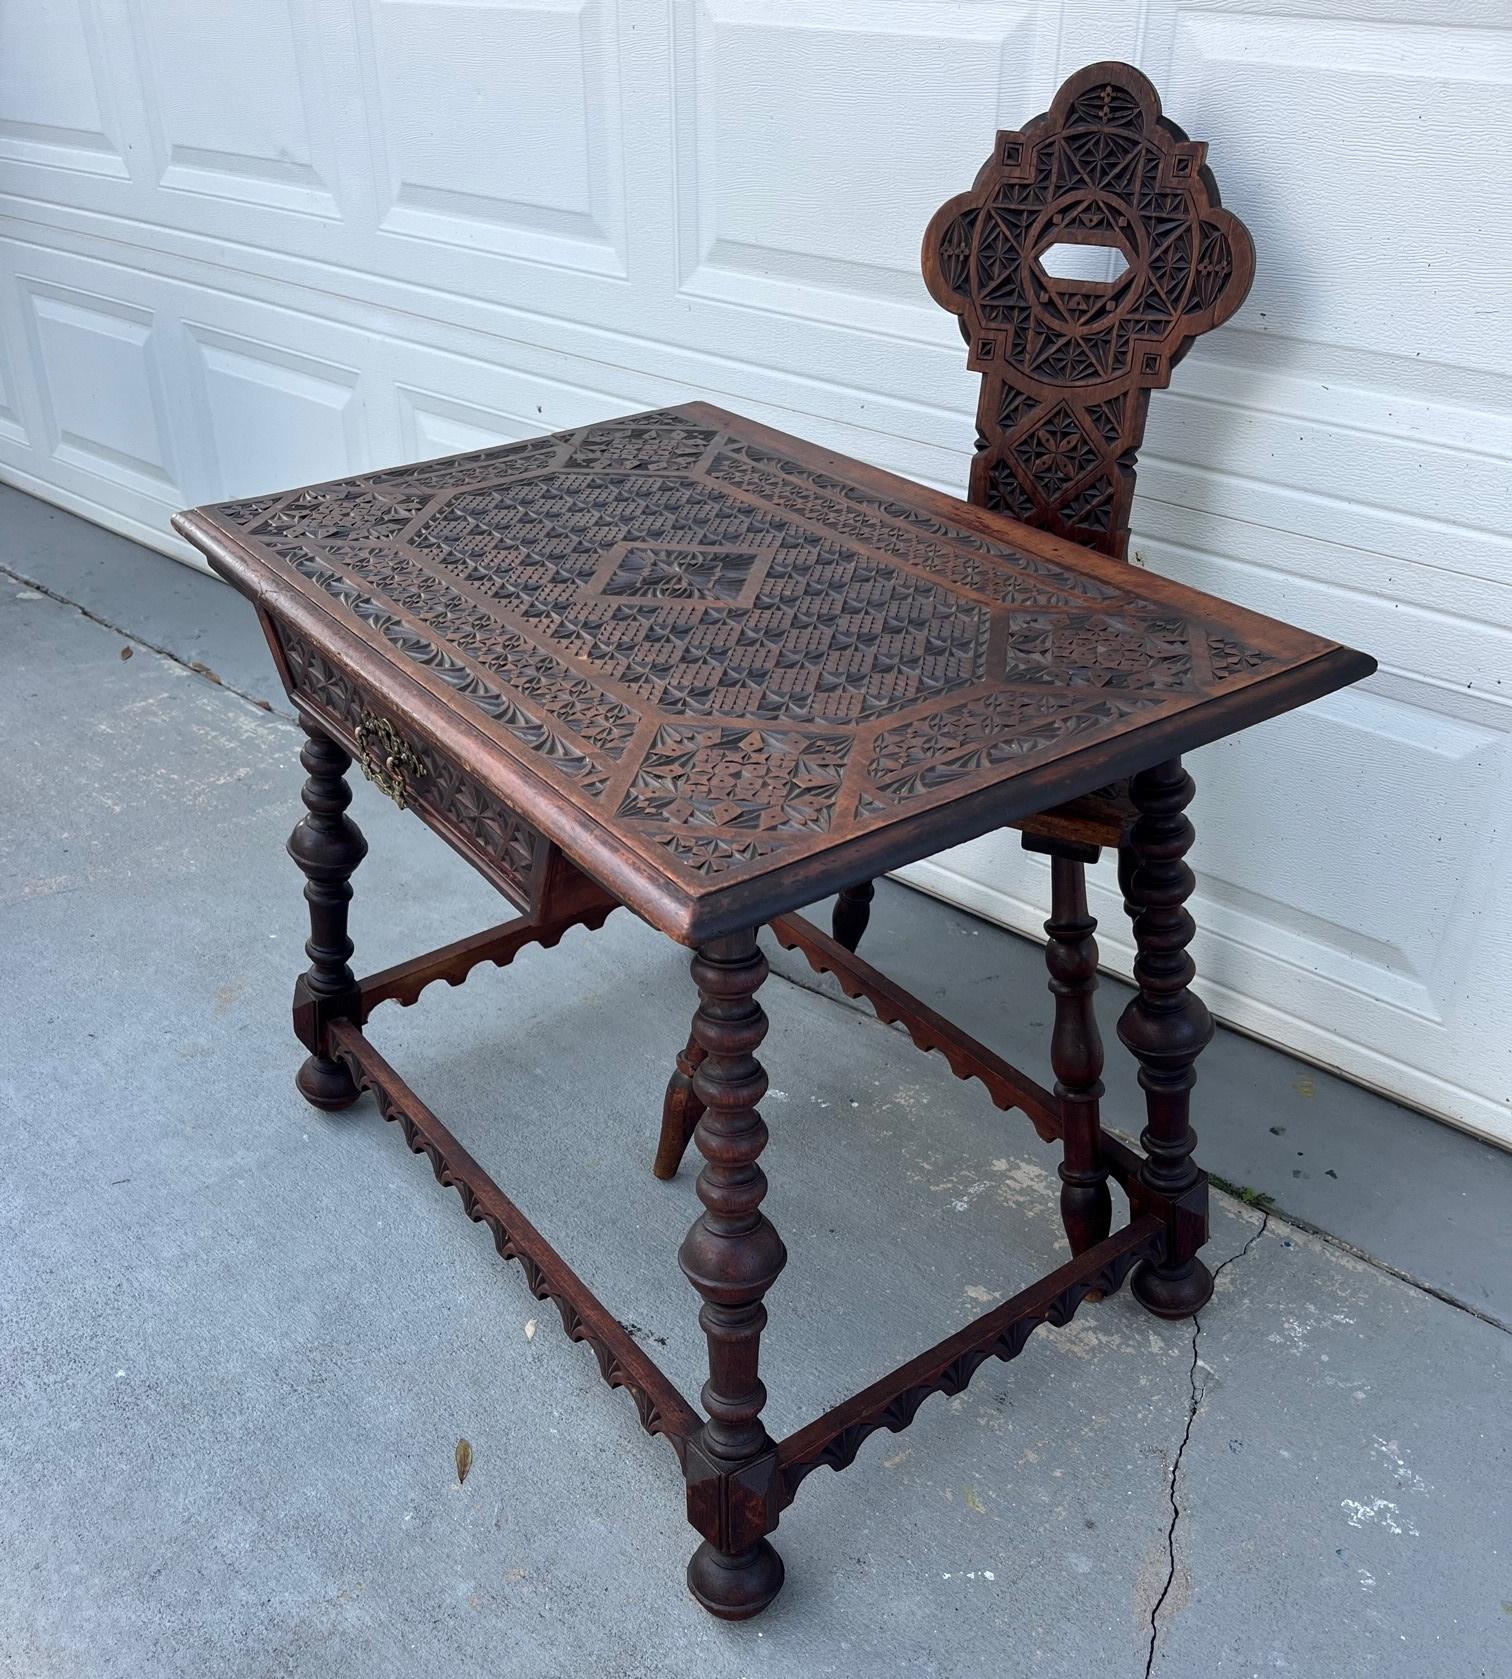 19th century German black forest chip-carved suite desk with drawer and chair.

Impressive and extremely rare Black Forest desk and chair. The rectangular surface is crafted in chip-carving, also known as Kerbschnitt technique. The intricate